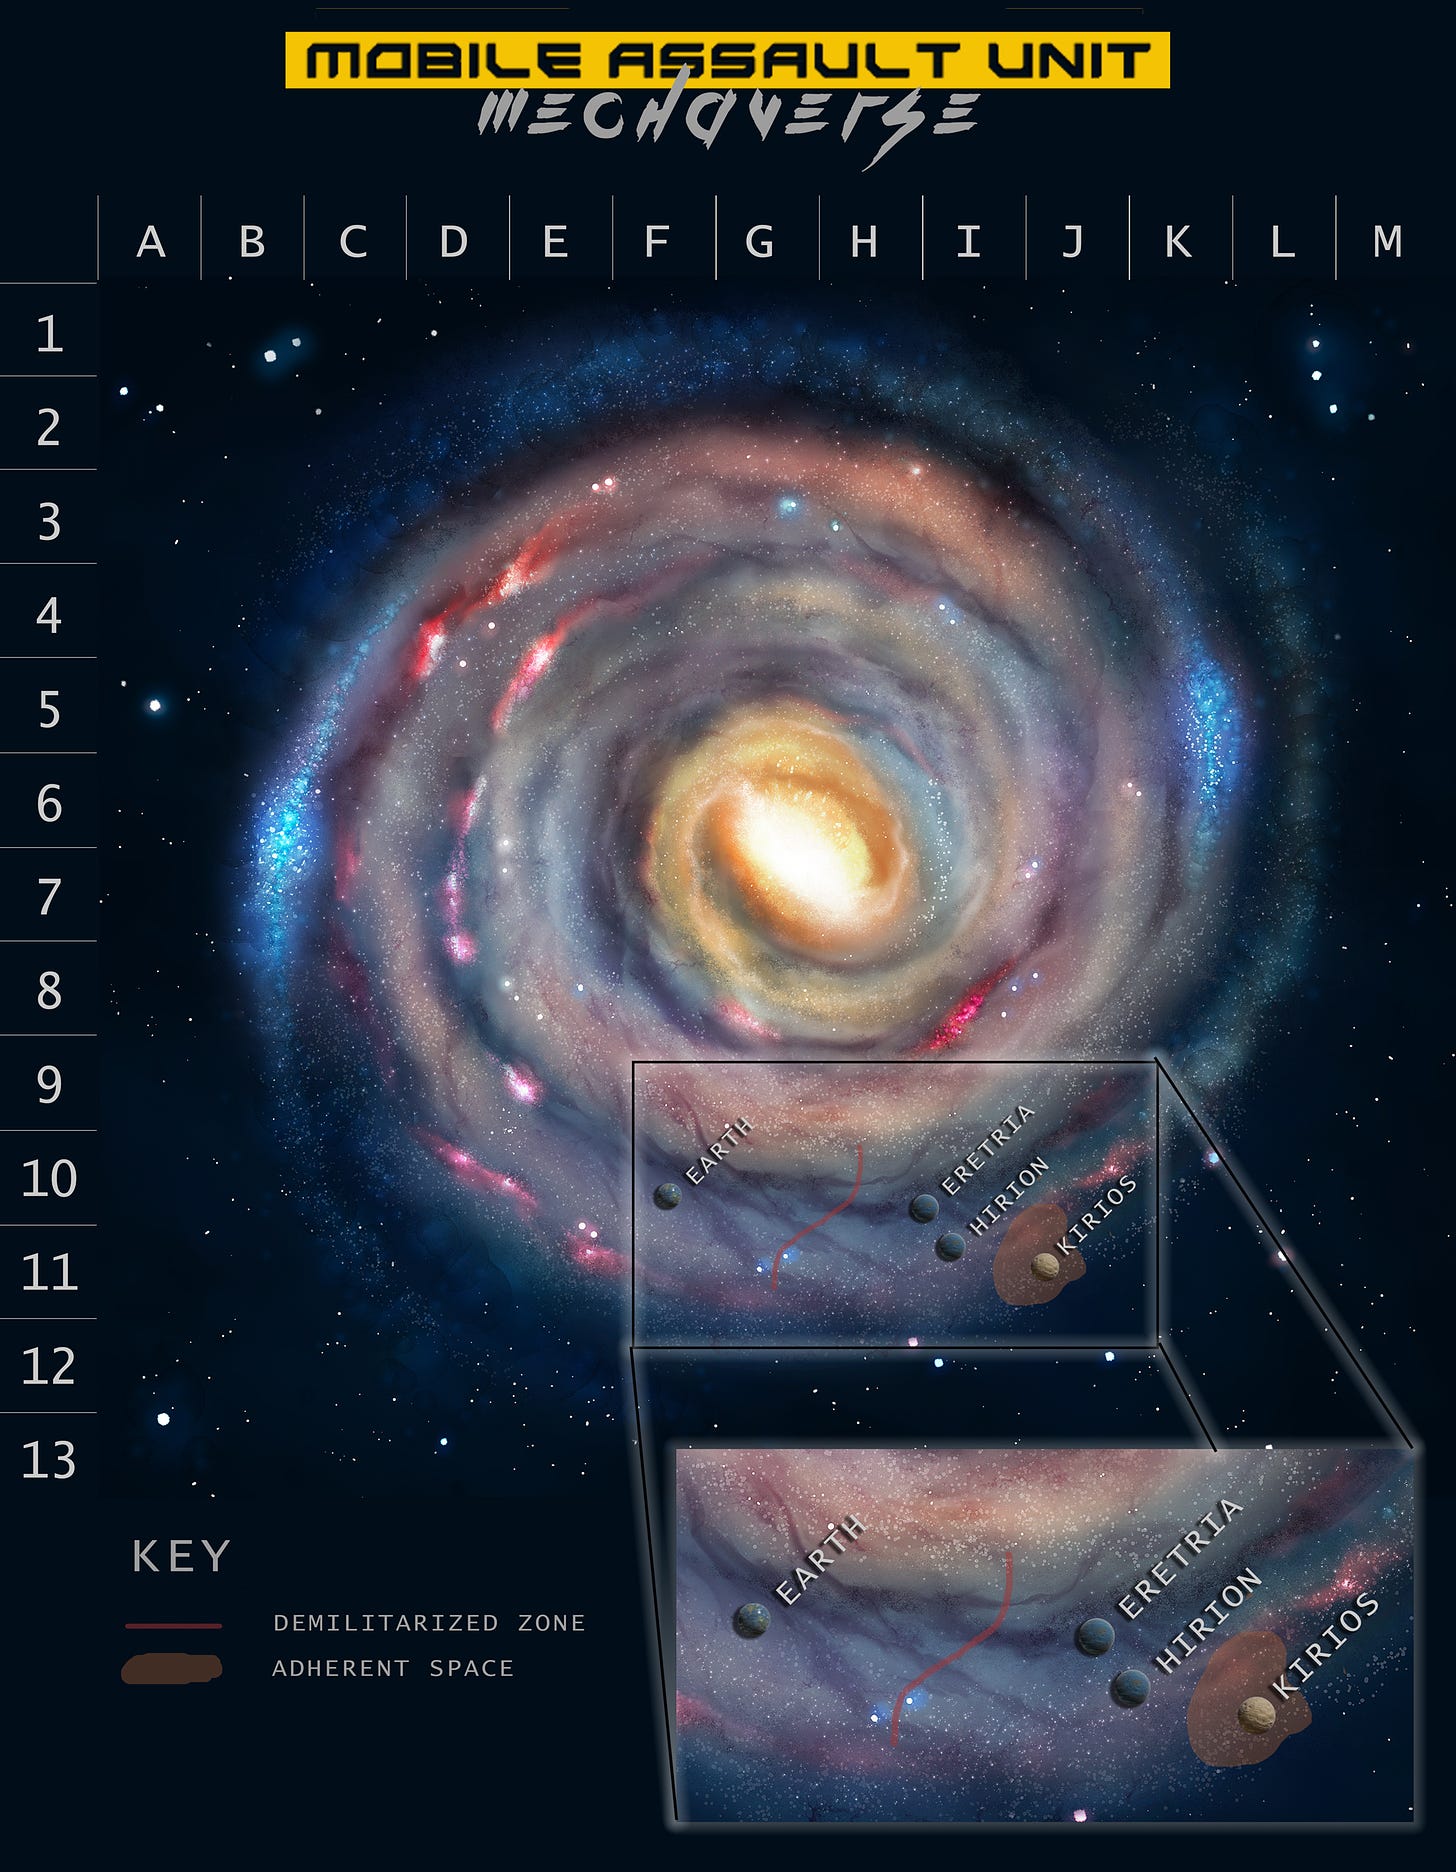 A map of the spiral galaxy we call the milky way that shows earth's relation to Hirion and Eretria, as well as where Adherent space is and the demilitarized zone